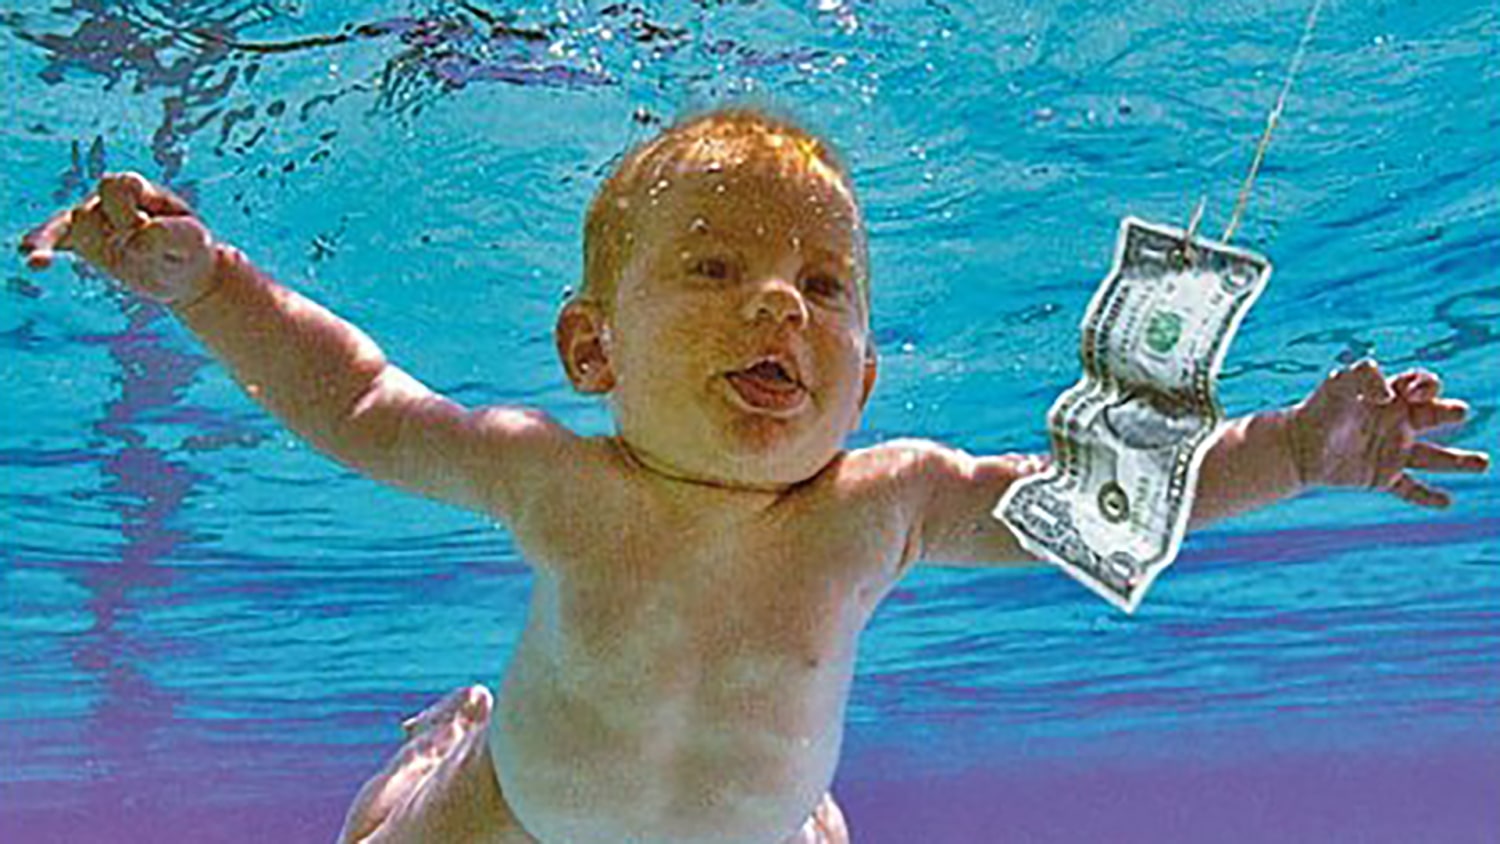 Illegal Little Girl - Man photographed as baby on 'Nevermind' cover sues Nirvana, alleging child  pornography